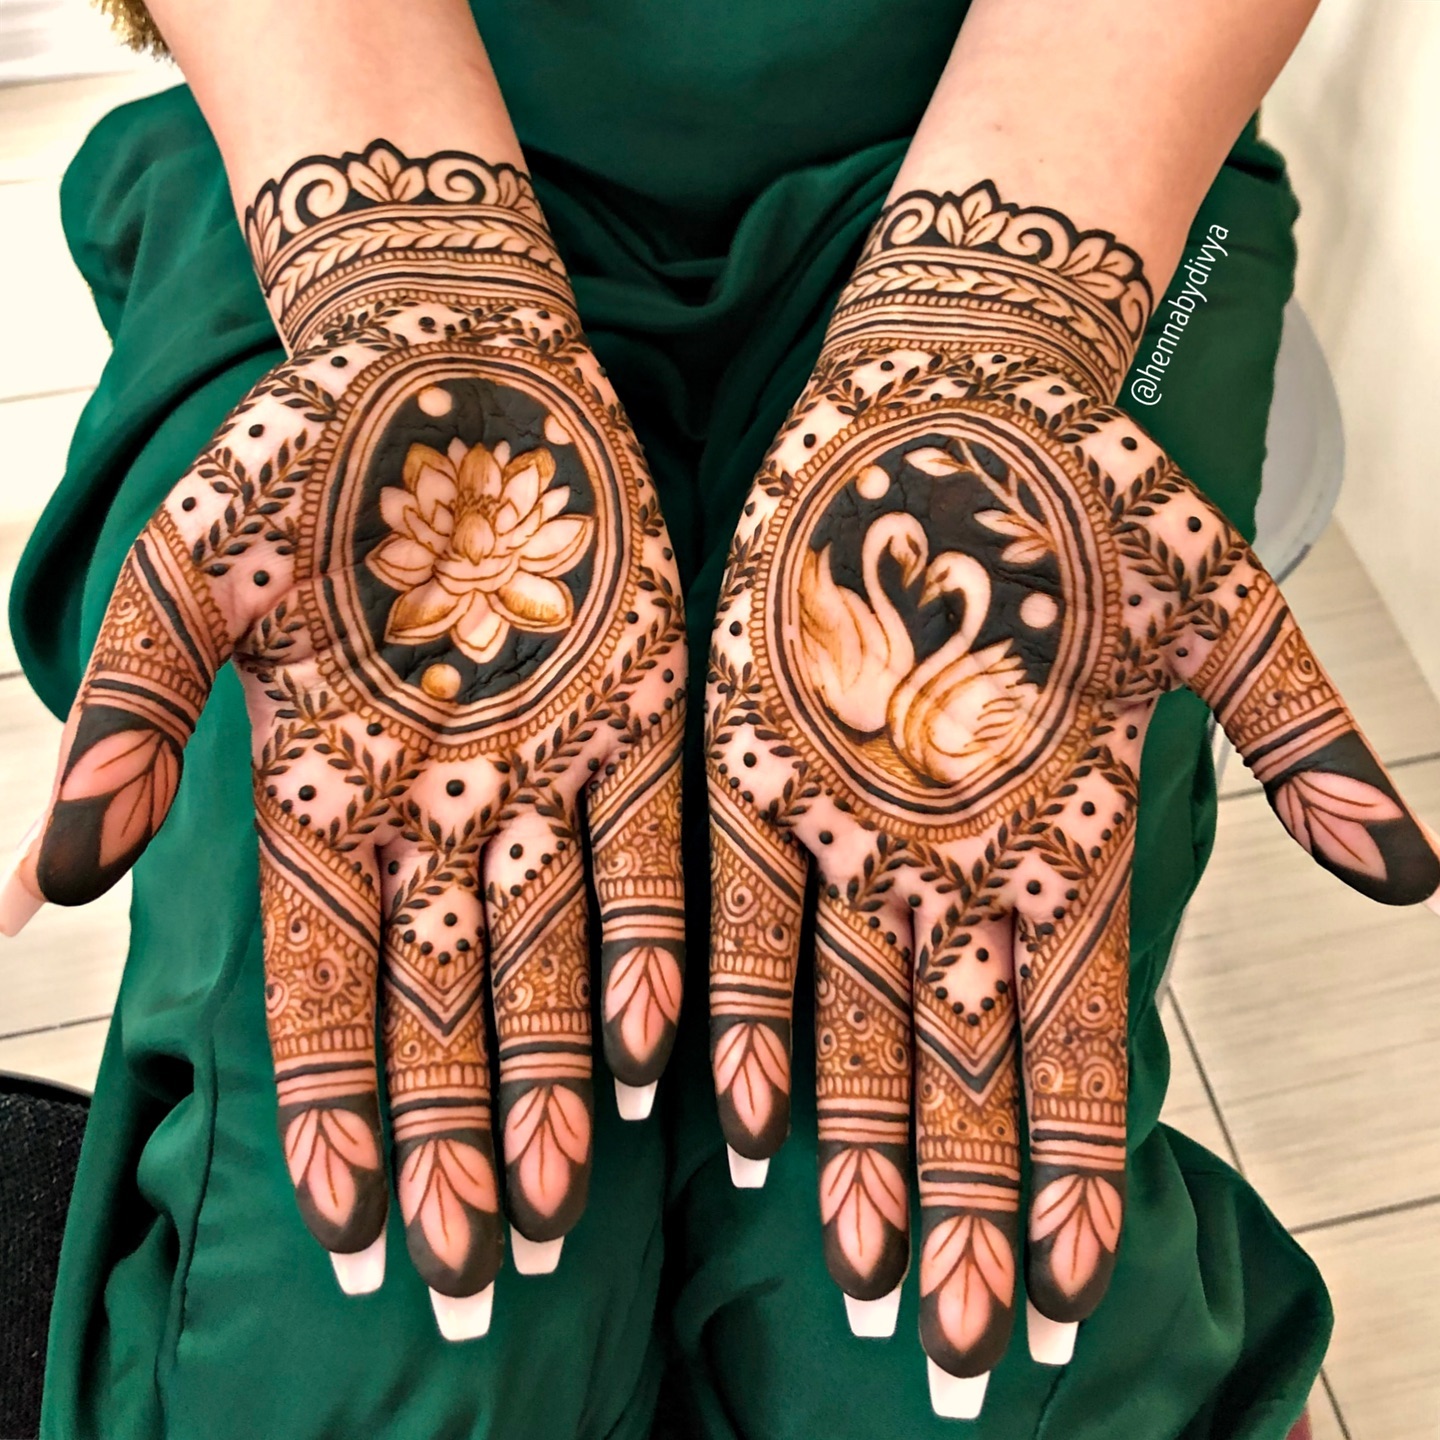 Bridal Mehndi Designs You Need to Try in 2019 by jeetukumar - Issuu